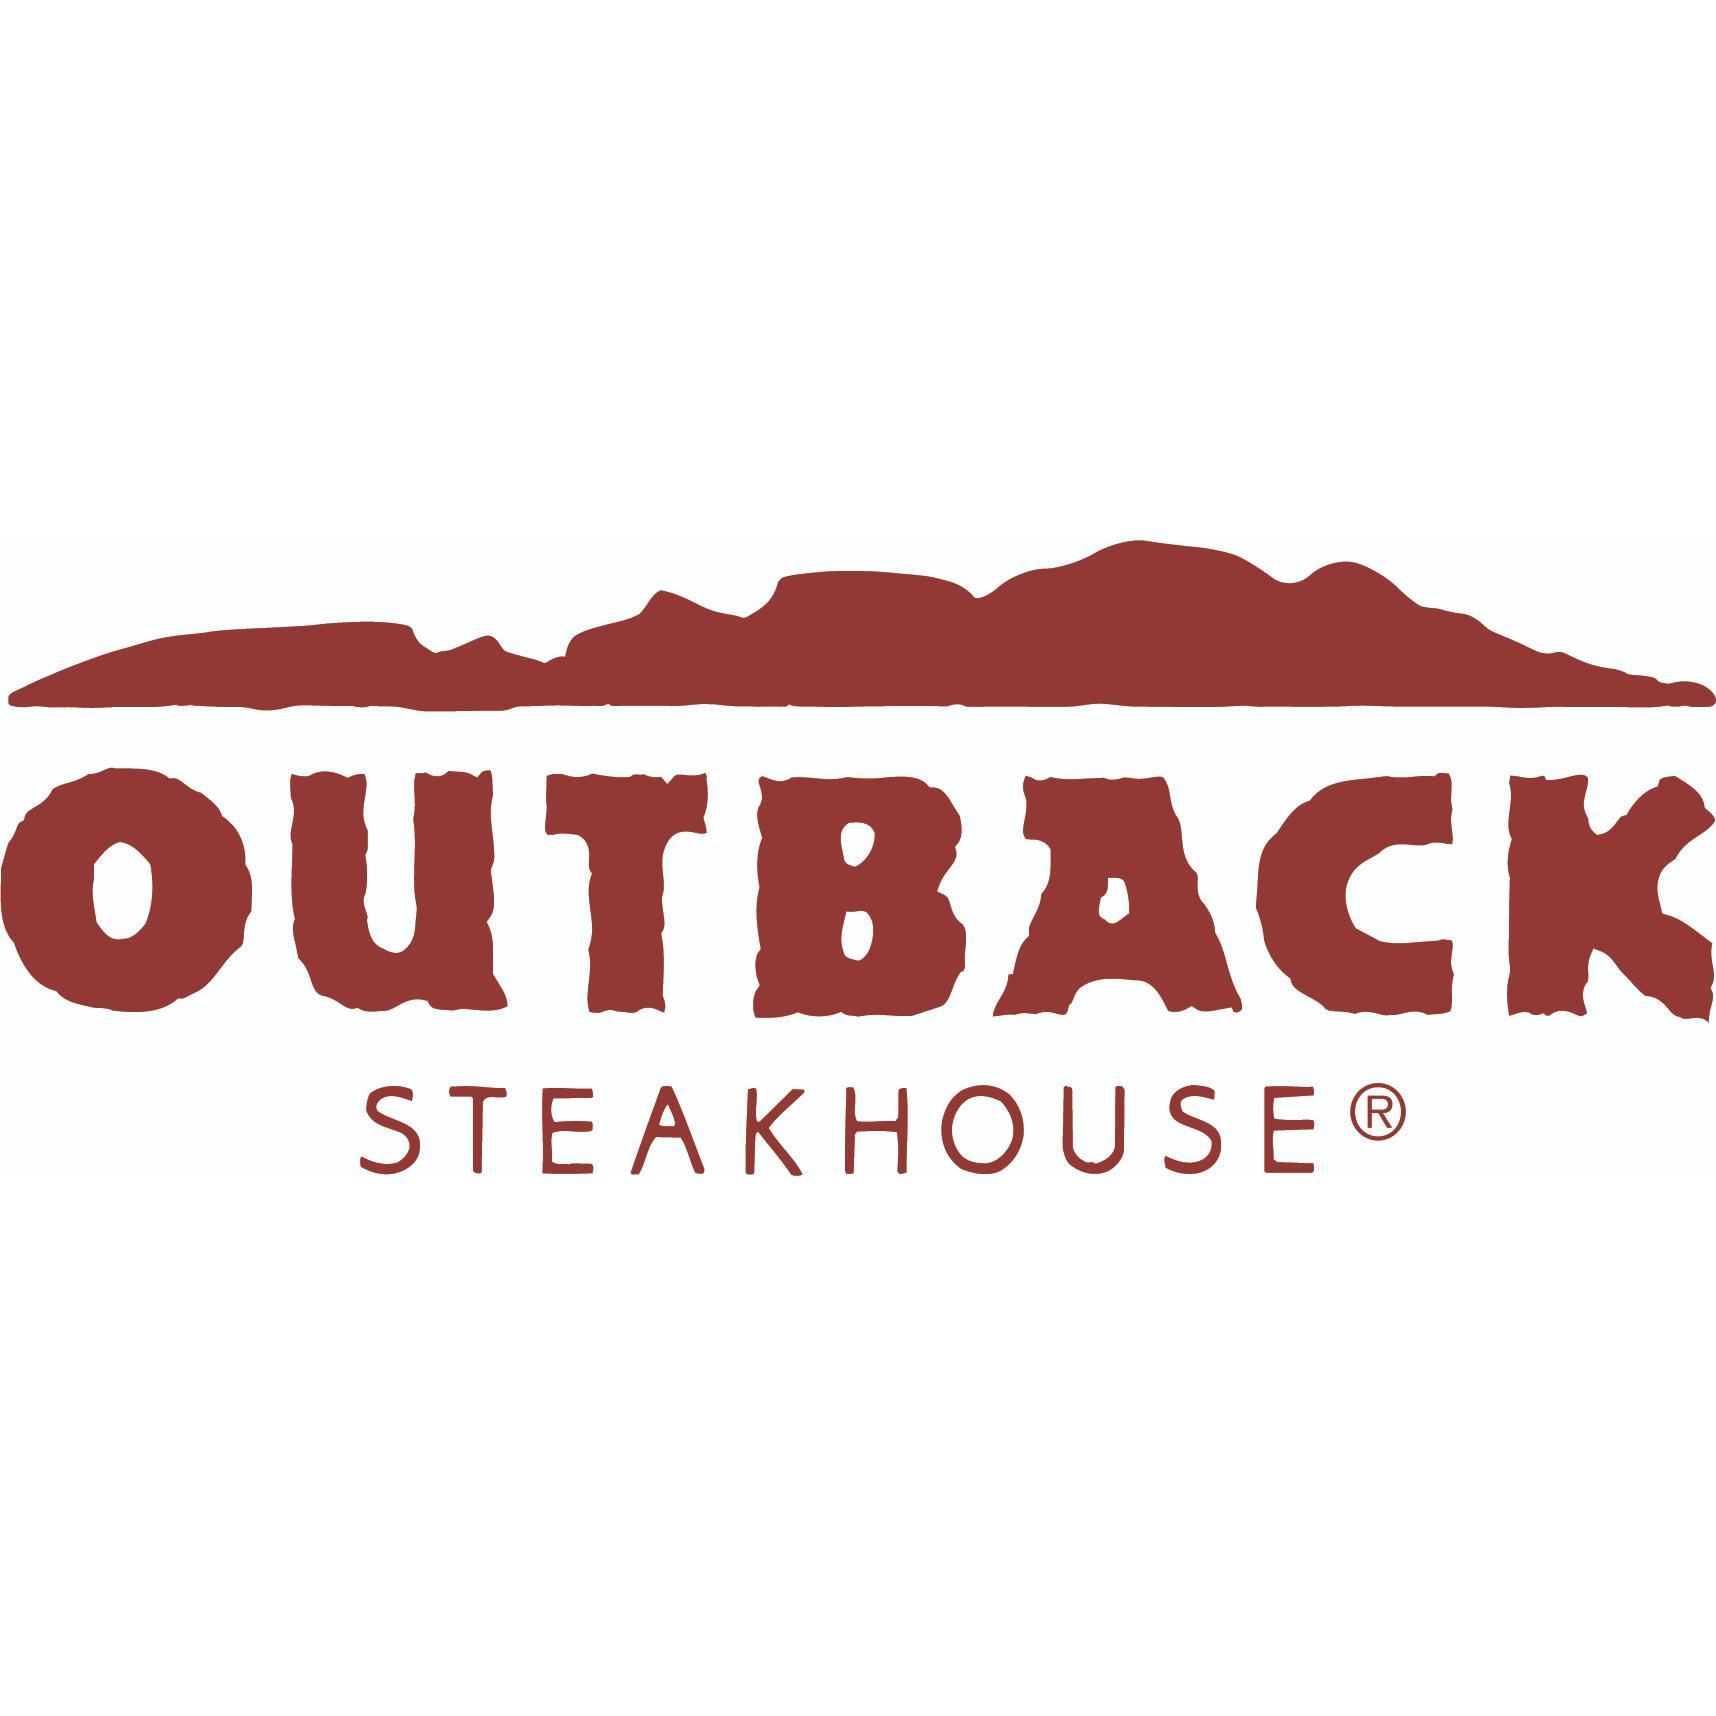 Outback Steakhouse Cape Coral